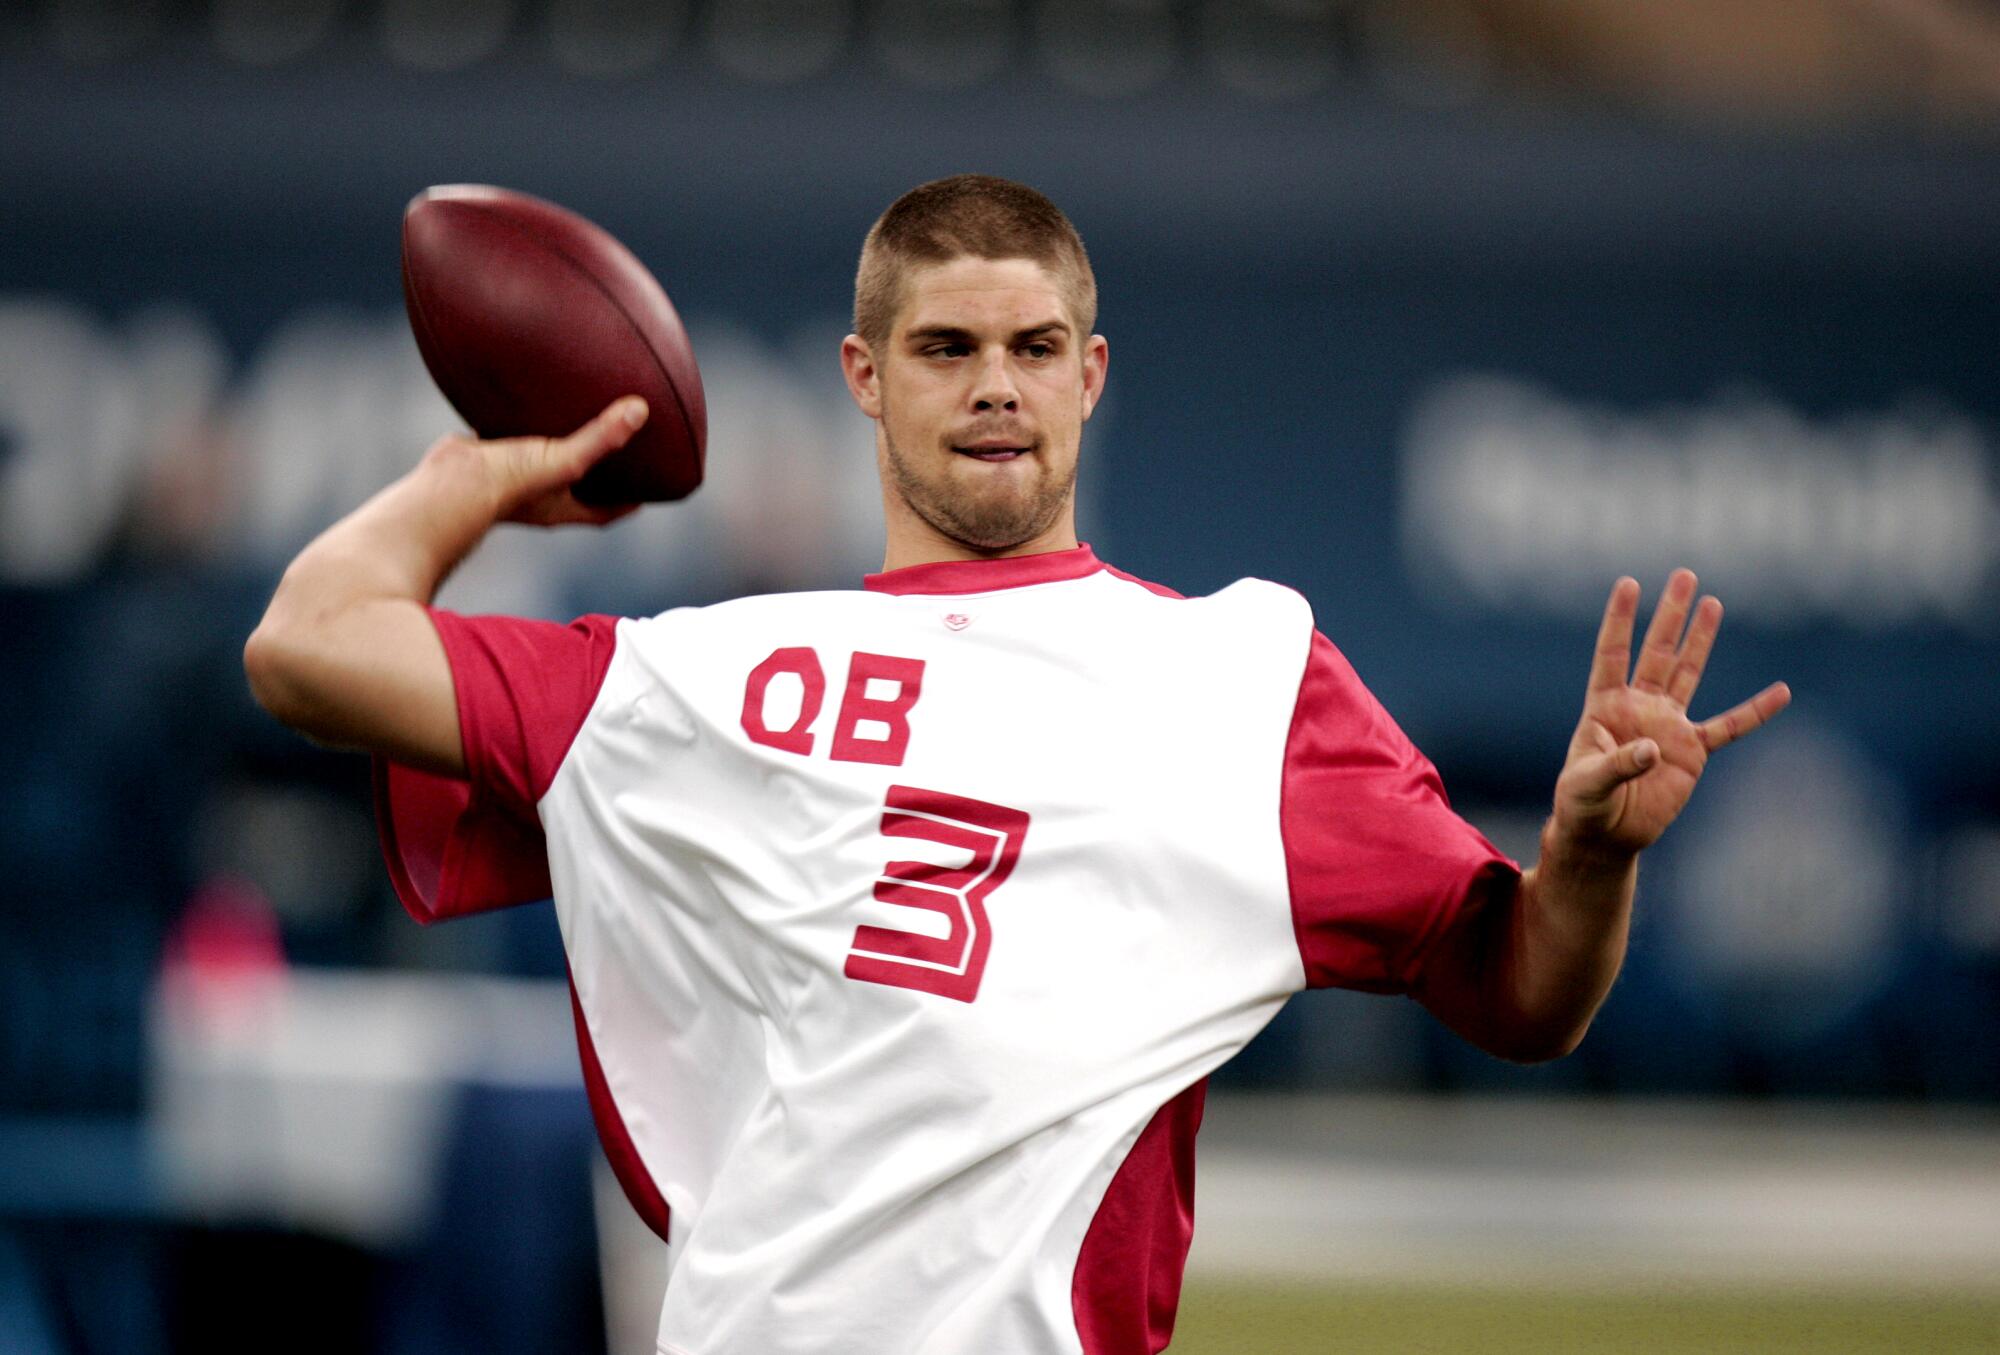 Quarterback Colt Brennan of Hawaii runs a drill at the NFL Combine in Indianapolis in 2008.